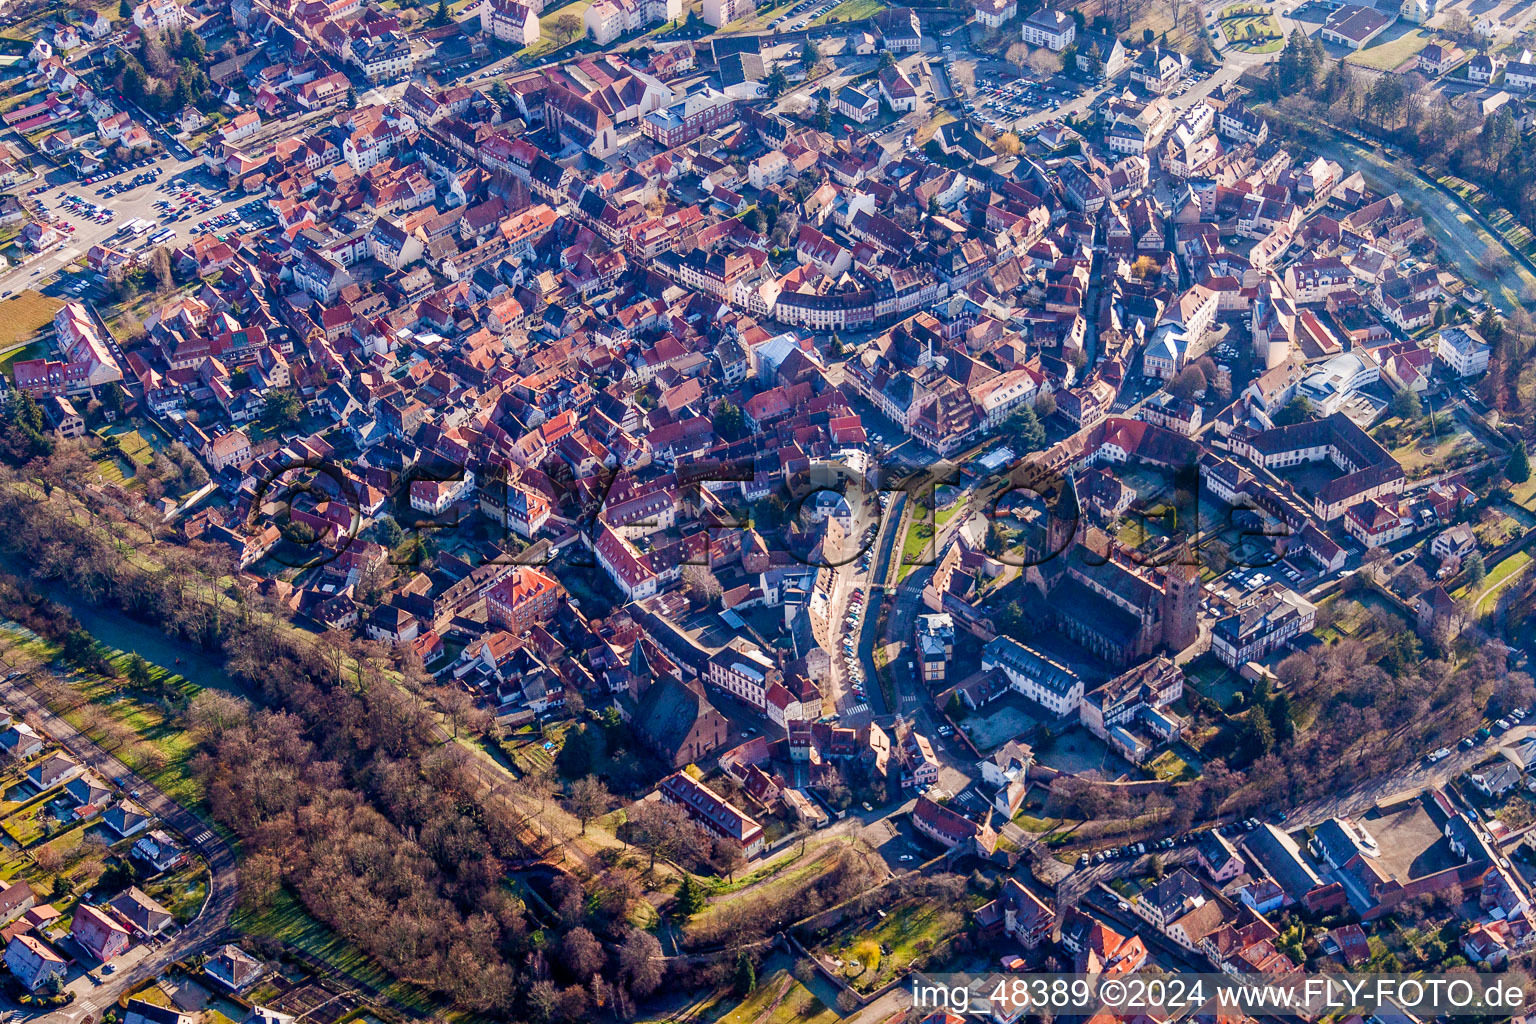 Aerial photograpy of Old Town area and city center in Wissembourg in Grand Est, France